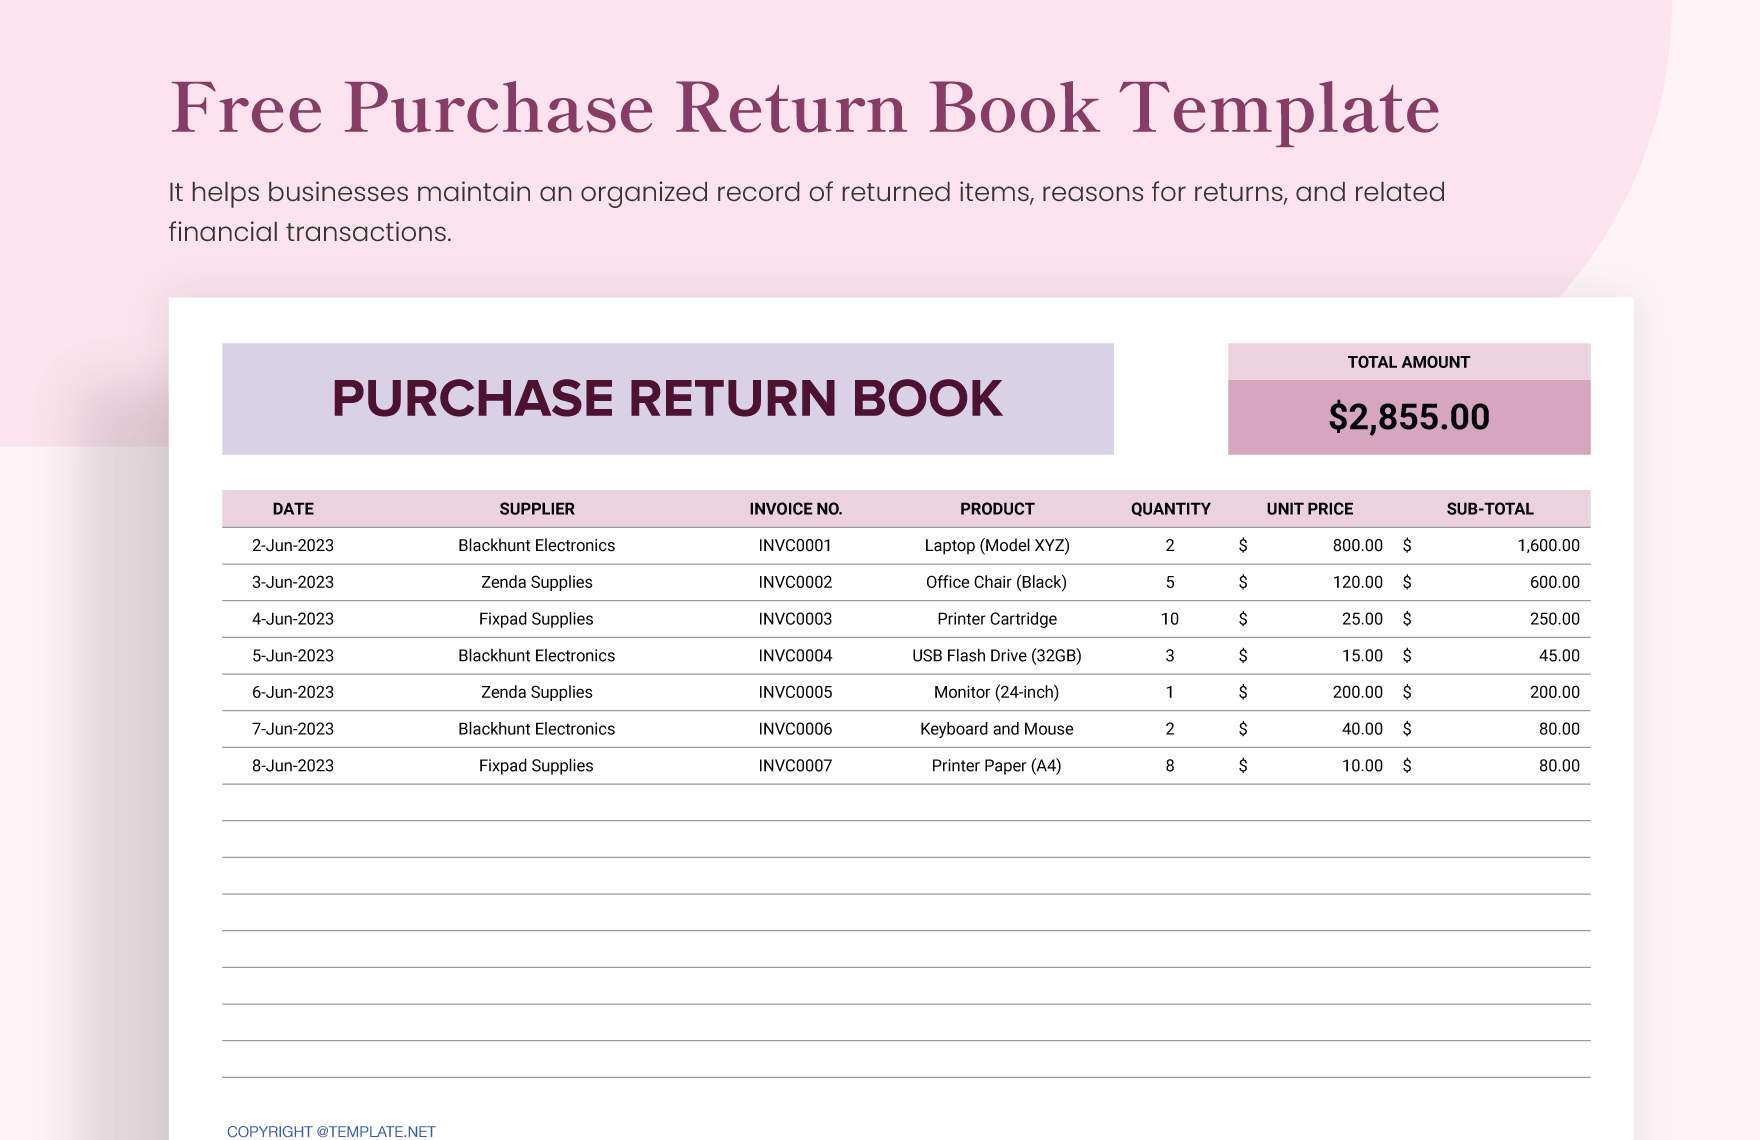 Free Purchase Return Book Template in Excel, Google Sheets